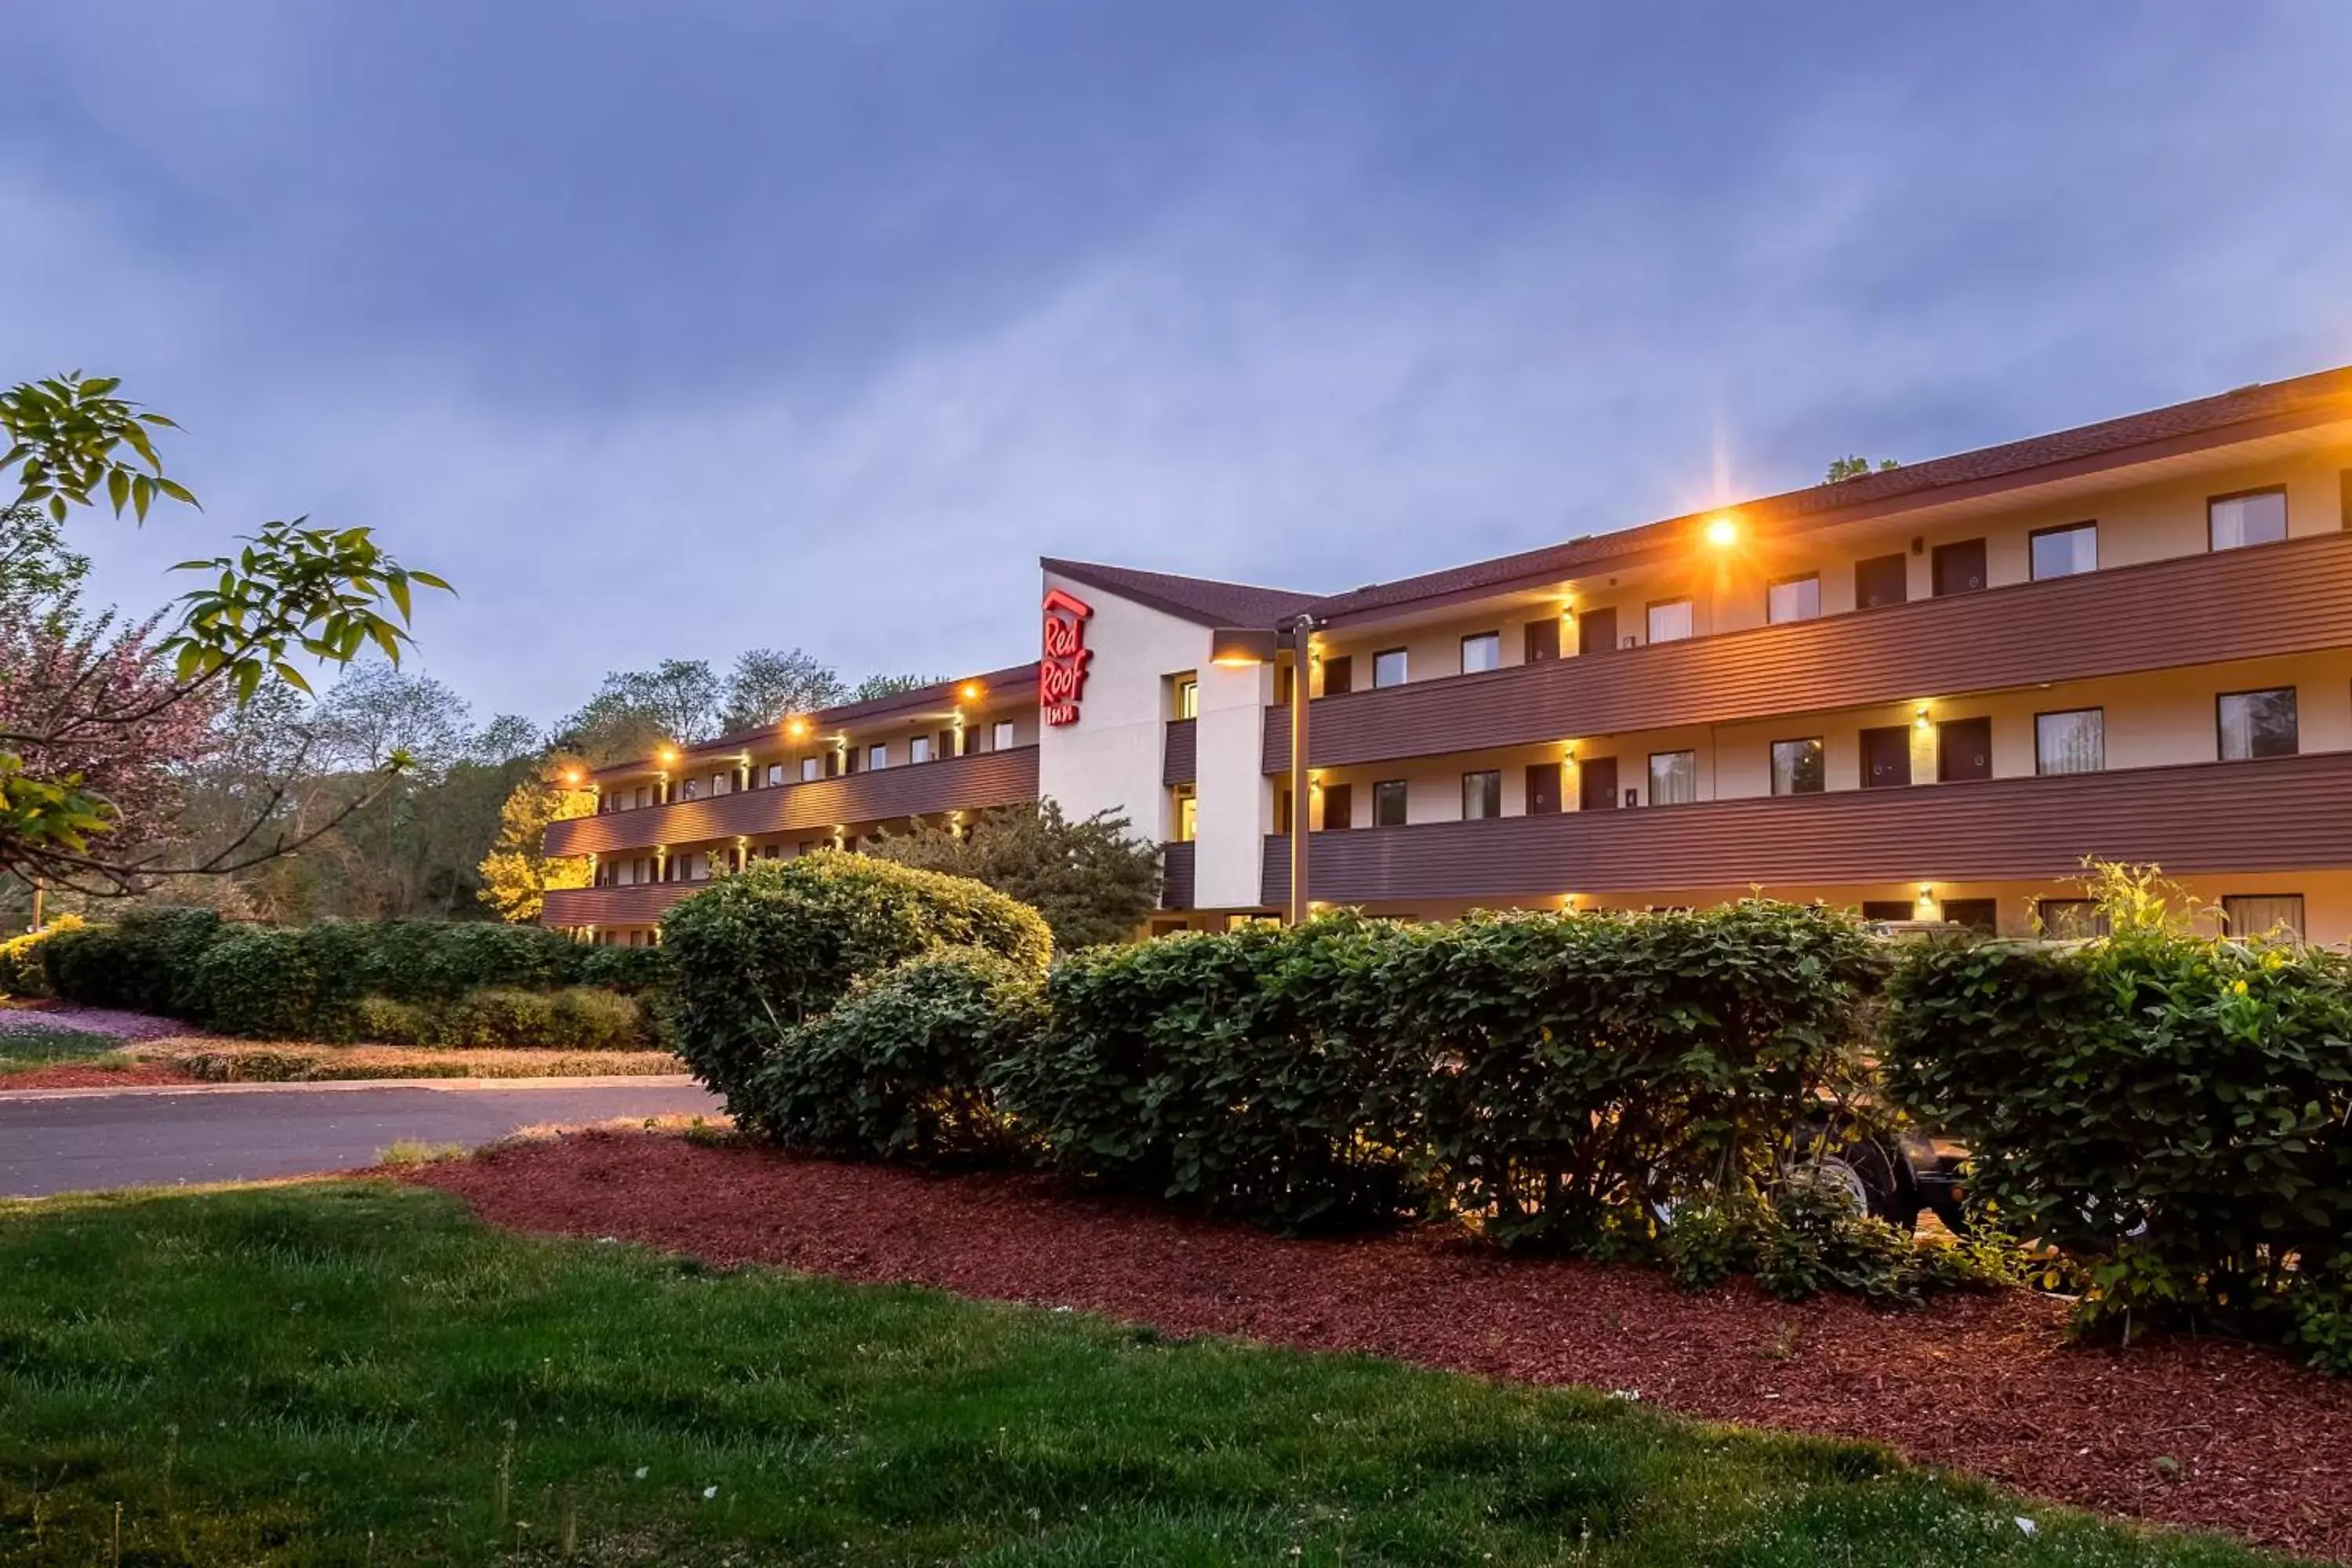 Property Building in Red Roof Inn Tinton Falls-Jersey Shore